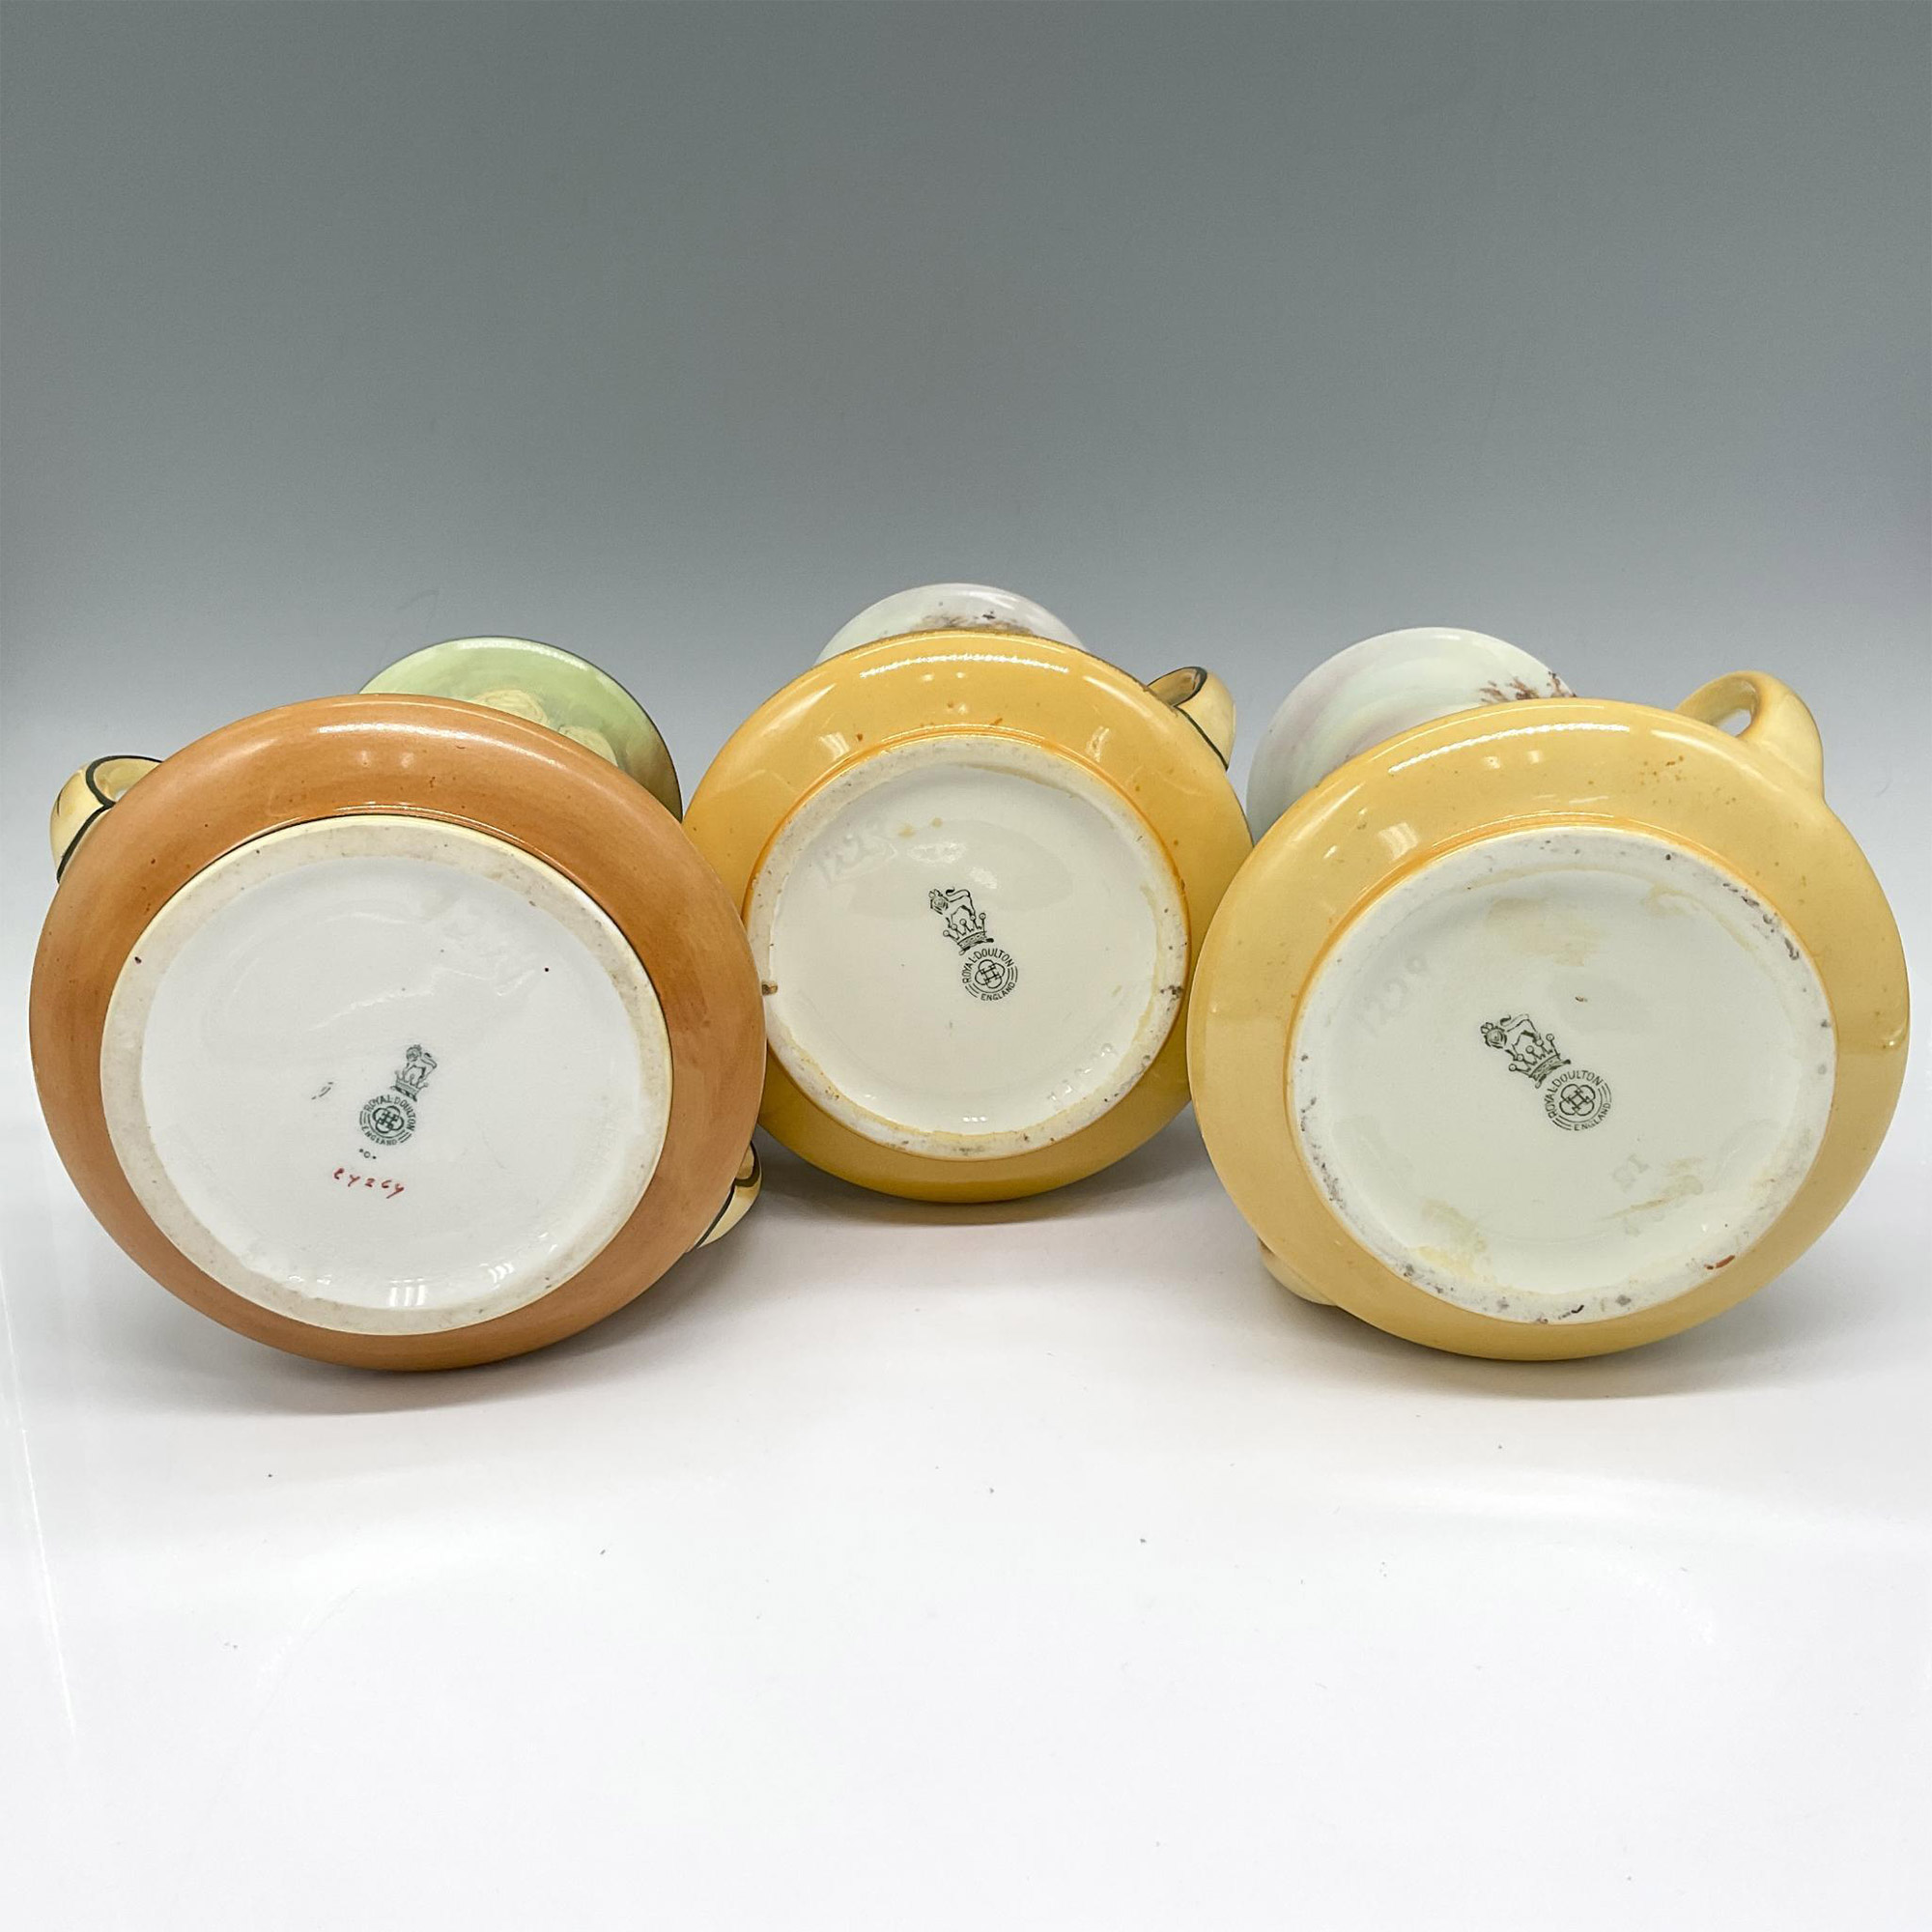 3pc Royal Doulton Series Ware, Shakespearean Vases - Image 3 of 3